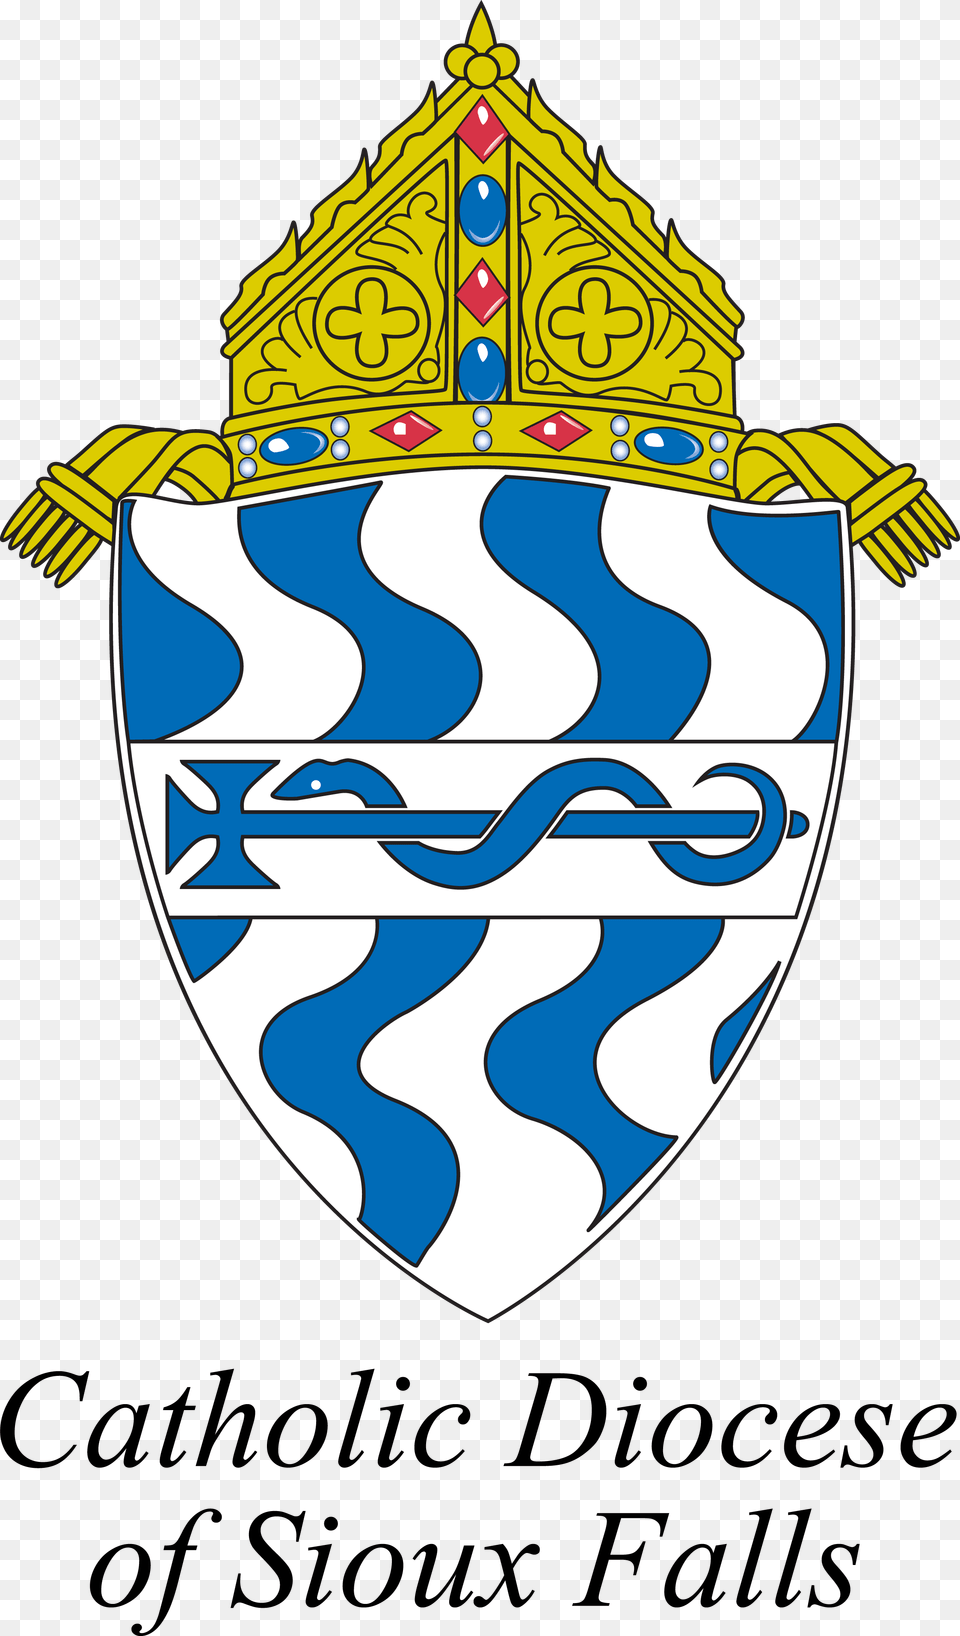 Catholic Diocese Of Sioux Falls Crest 4 Color Diocese Of Sioux Falls, Armor, Shield, Smoke Pipe Free Transparent Png